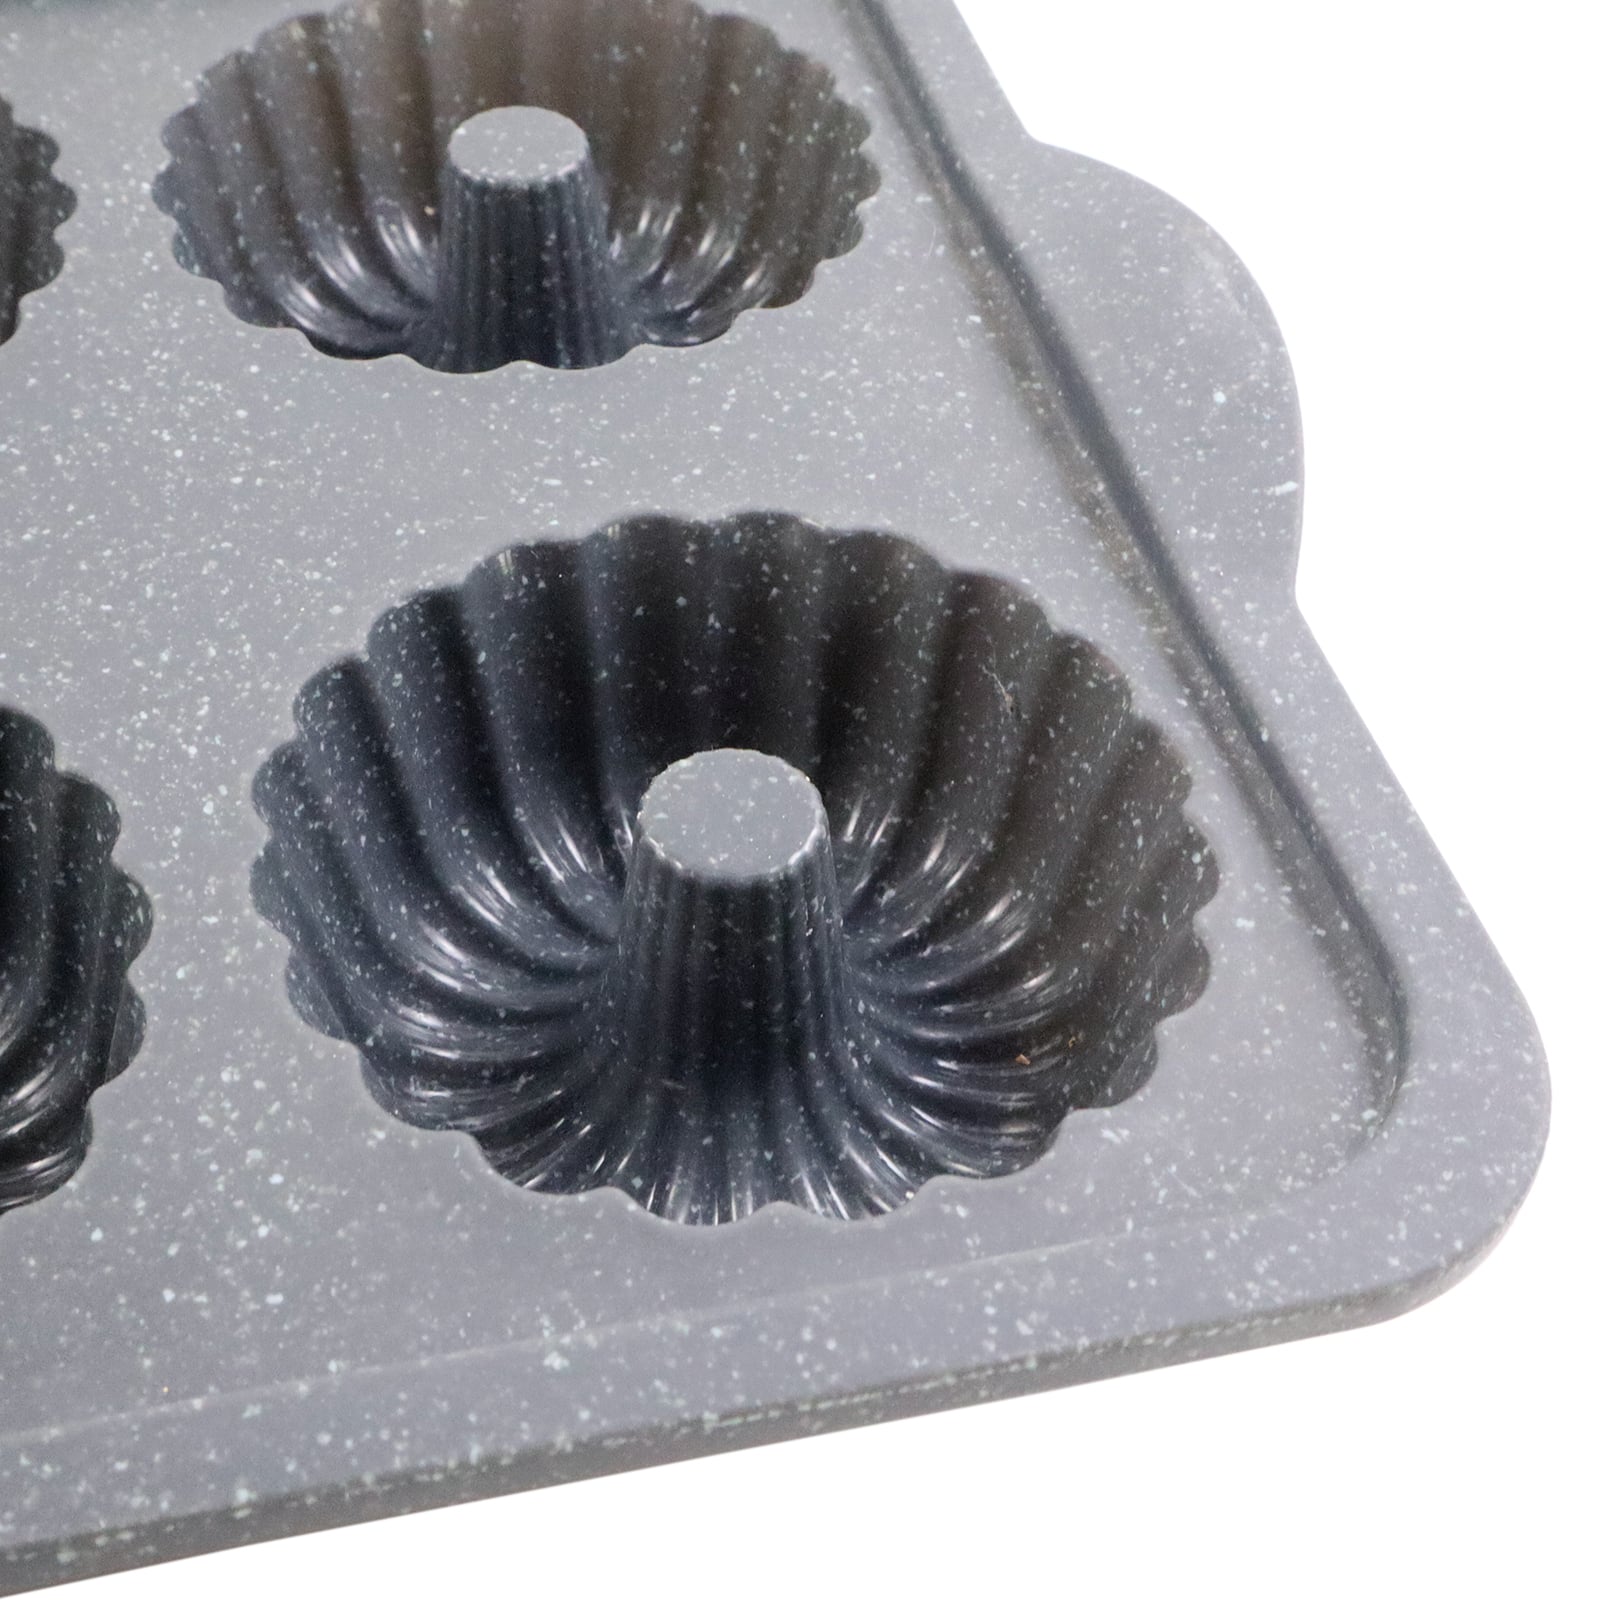 Mainstays 6 inch Mini Fluted Cake Pan, Carbon Steel